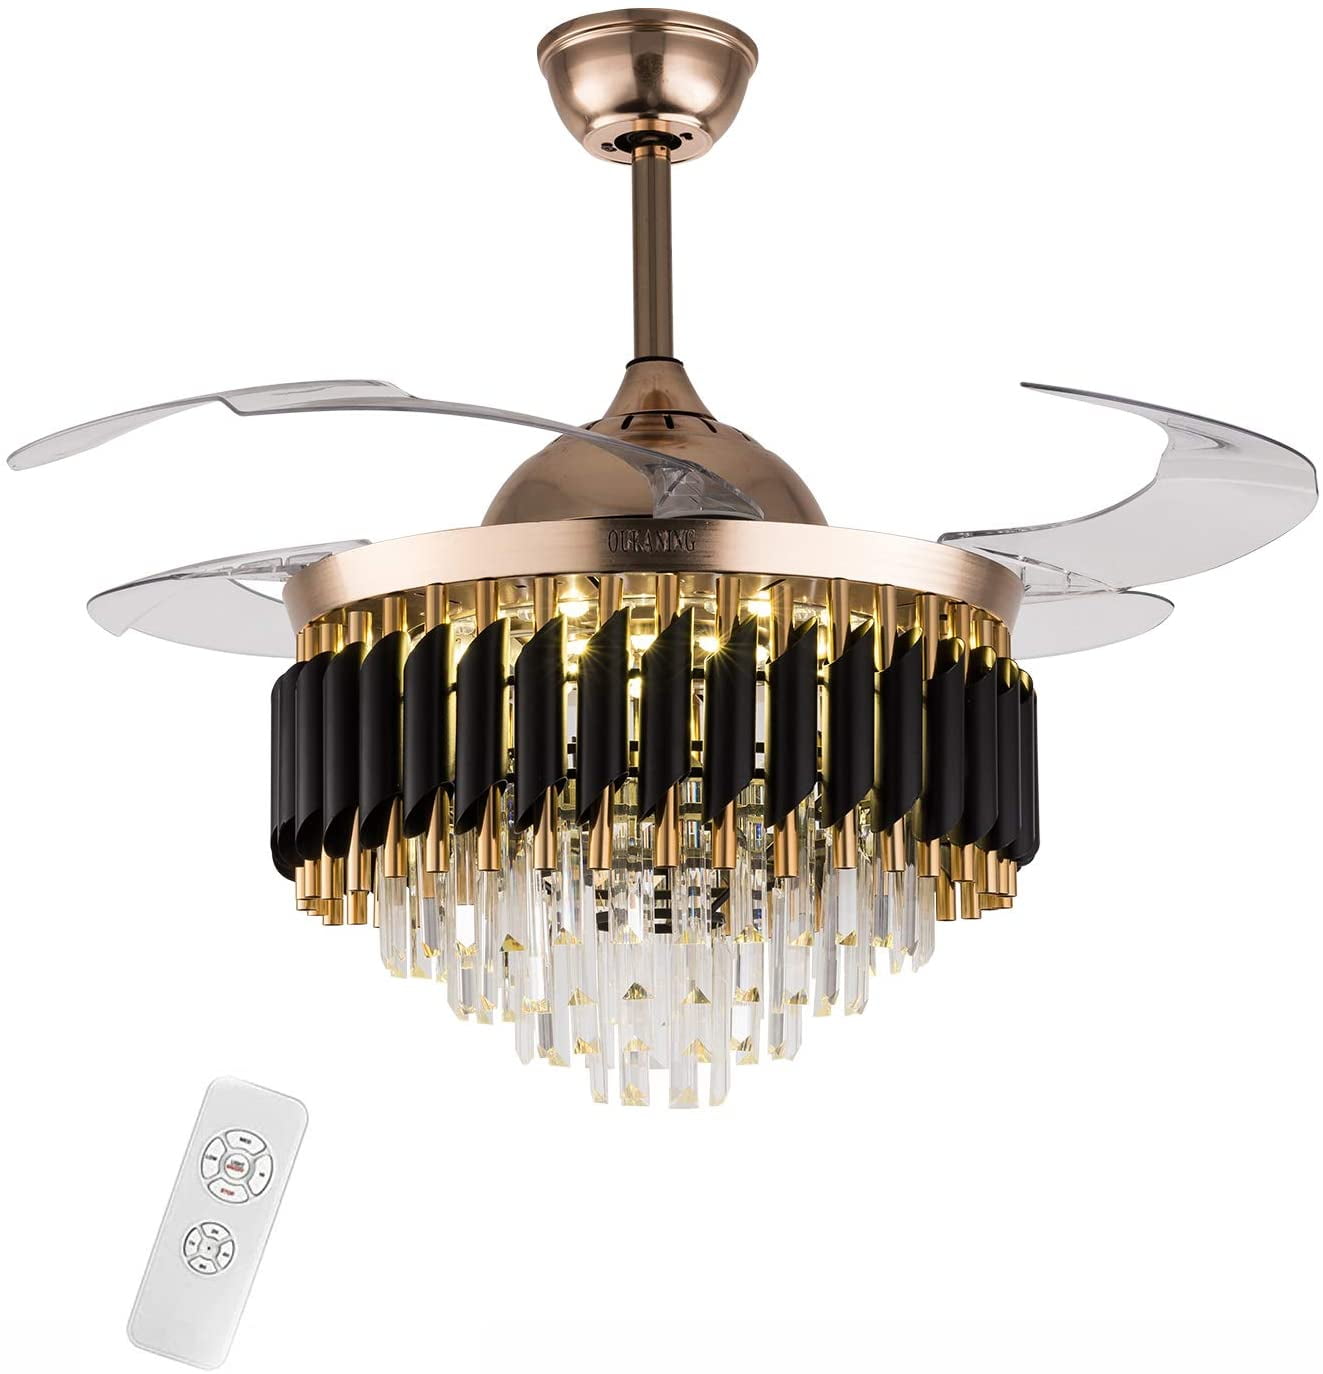 Details about   Crystal Ceiling Fan Chandelier LED Light Remote Control 3 Speed Modern Style TOP 